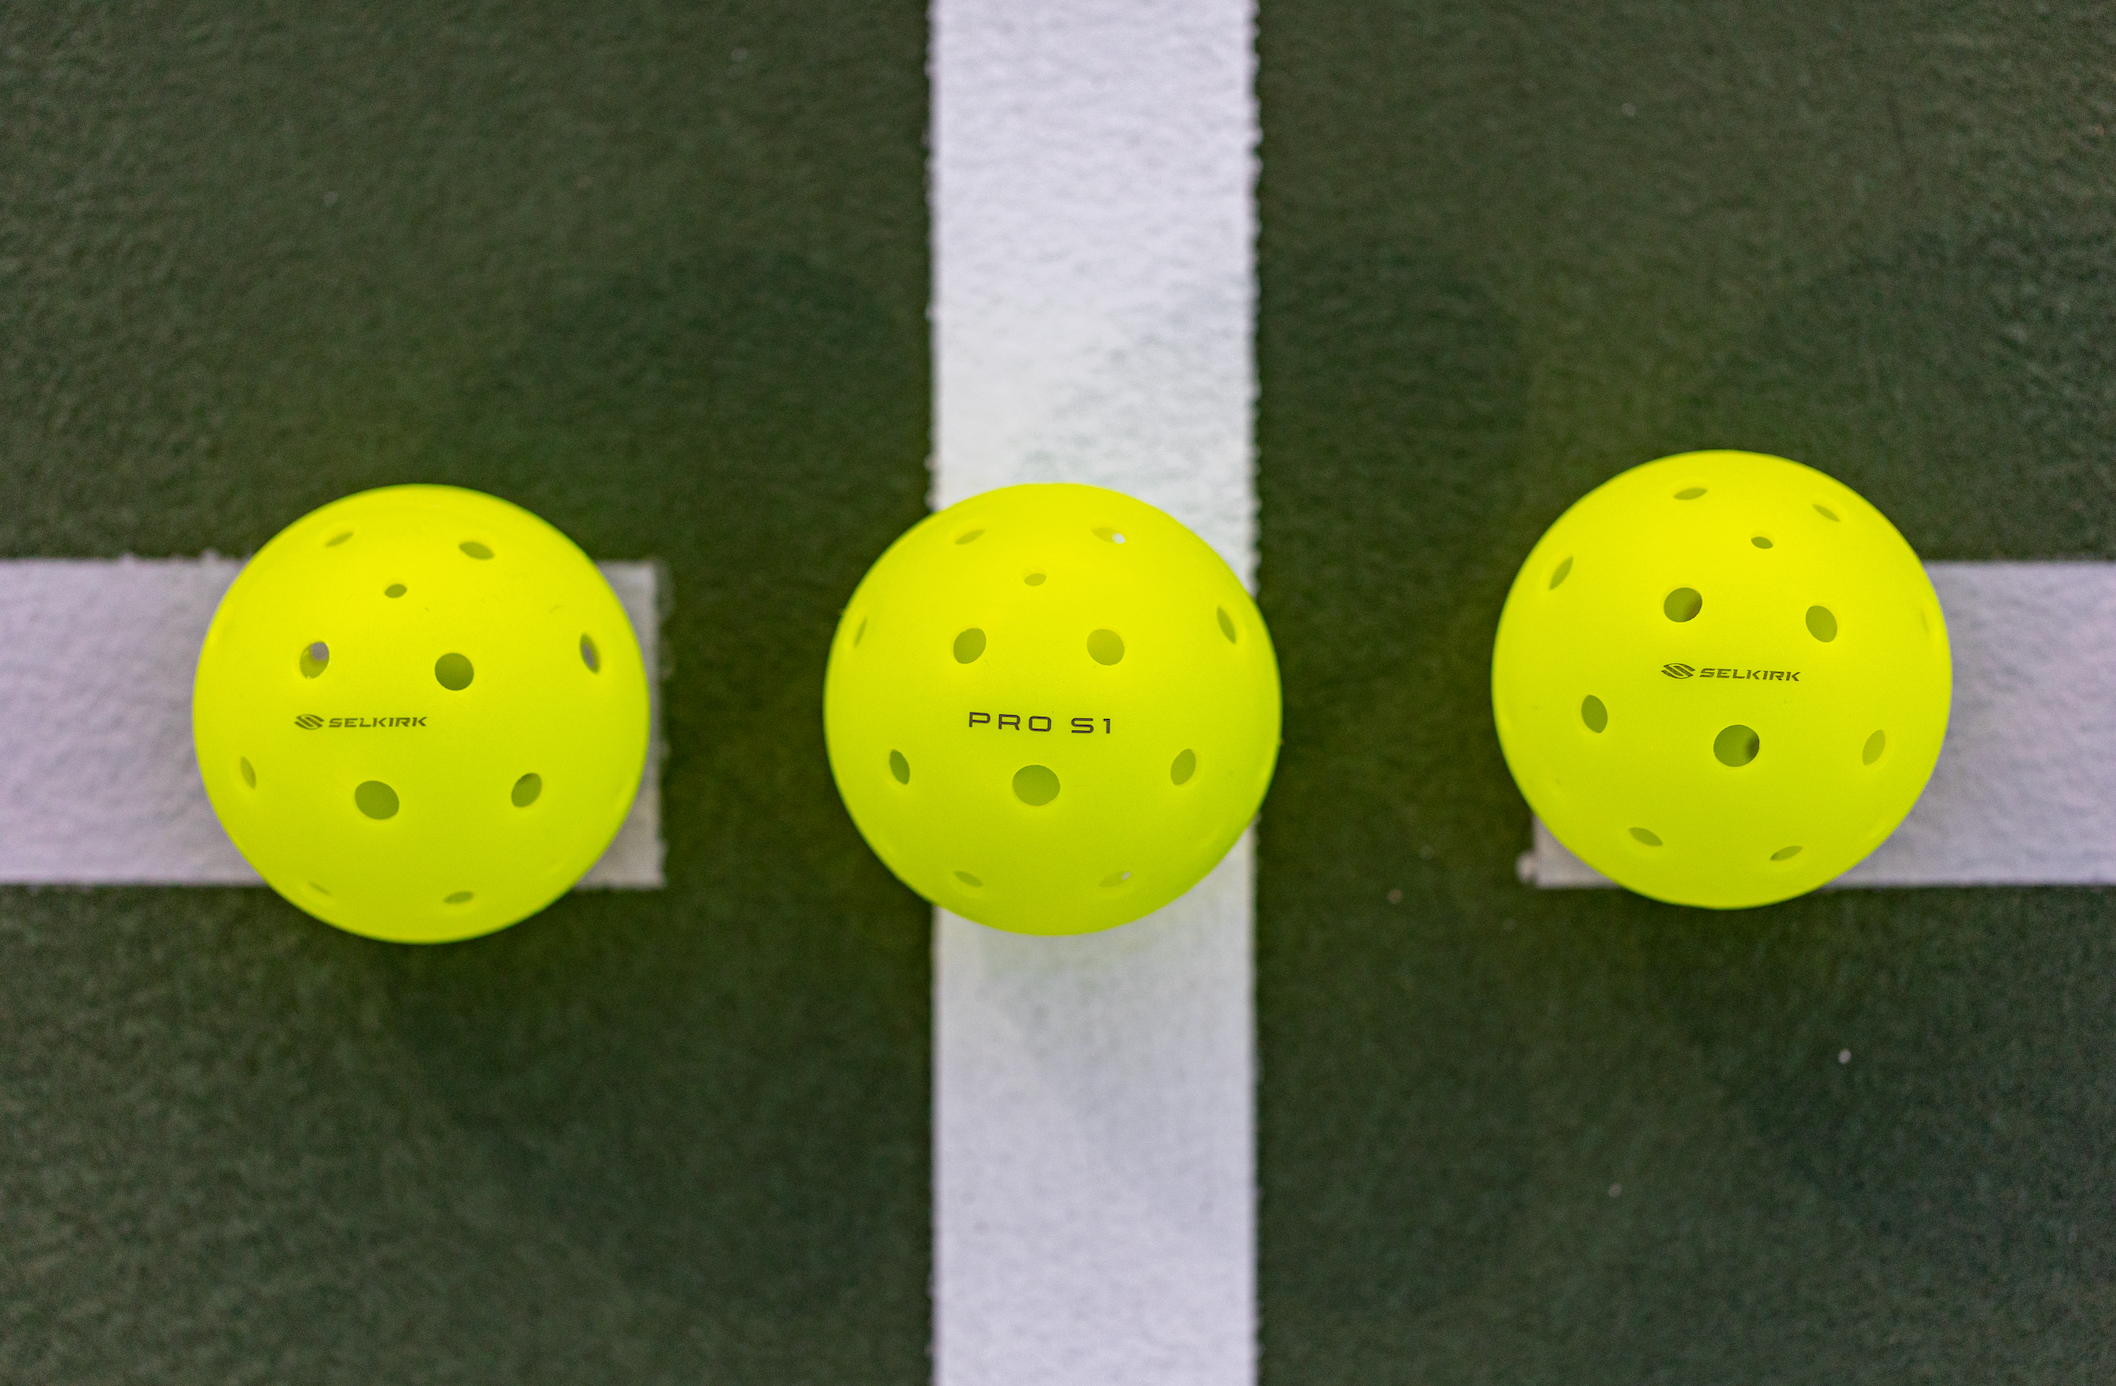 The Pro S1 Pickleball offers superior durability than other pickleballs on the market.